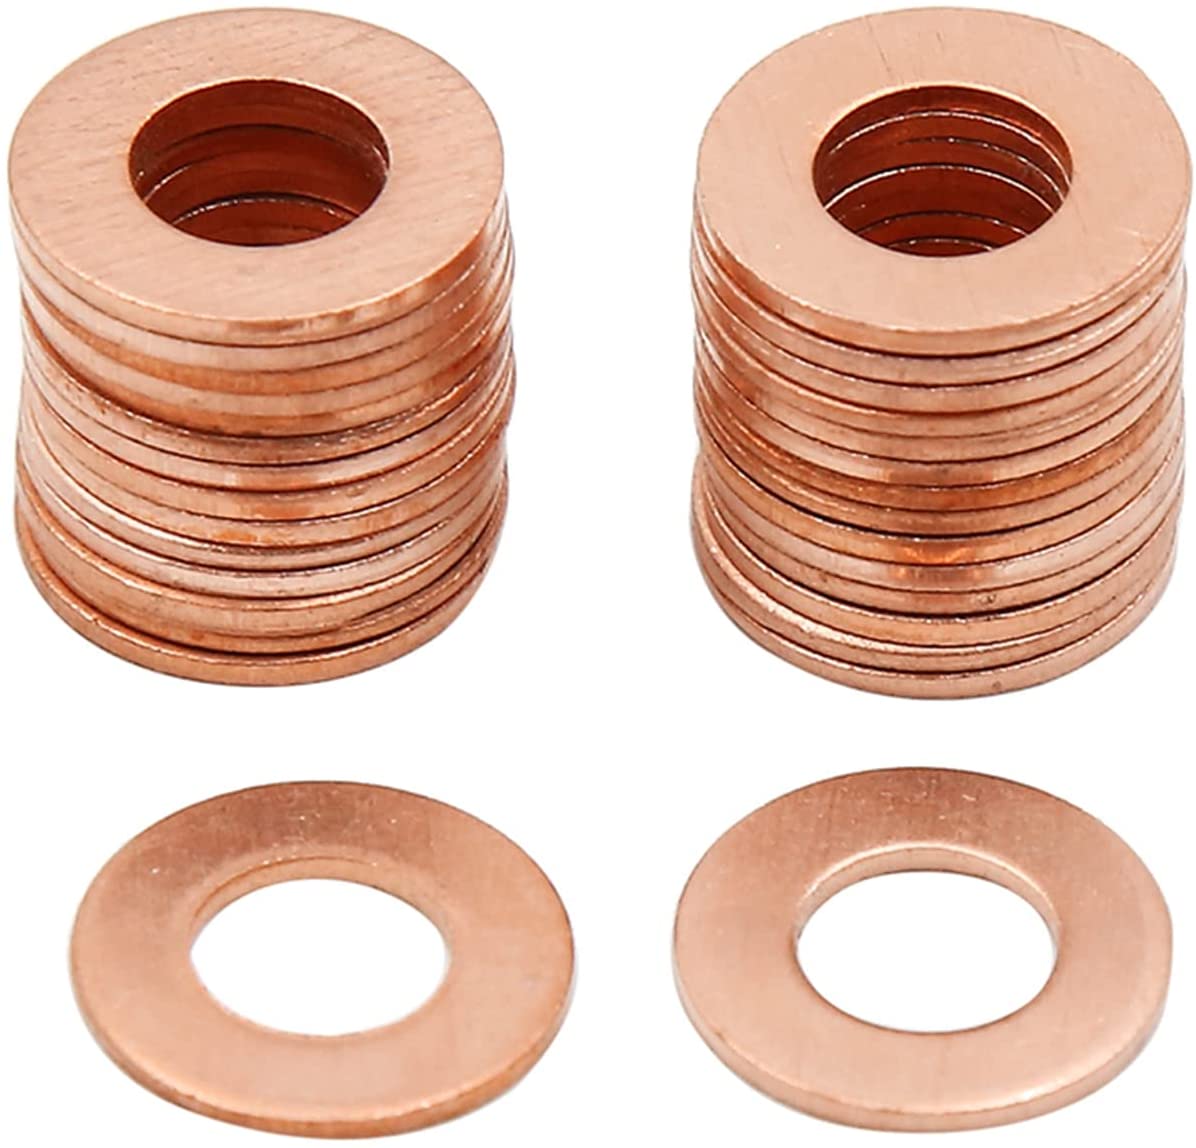 300pcs Metric M7x14x1mm Copper flat washer gasket Copper crush washer Sealing Ring for Screw Bolt Nut